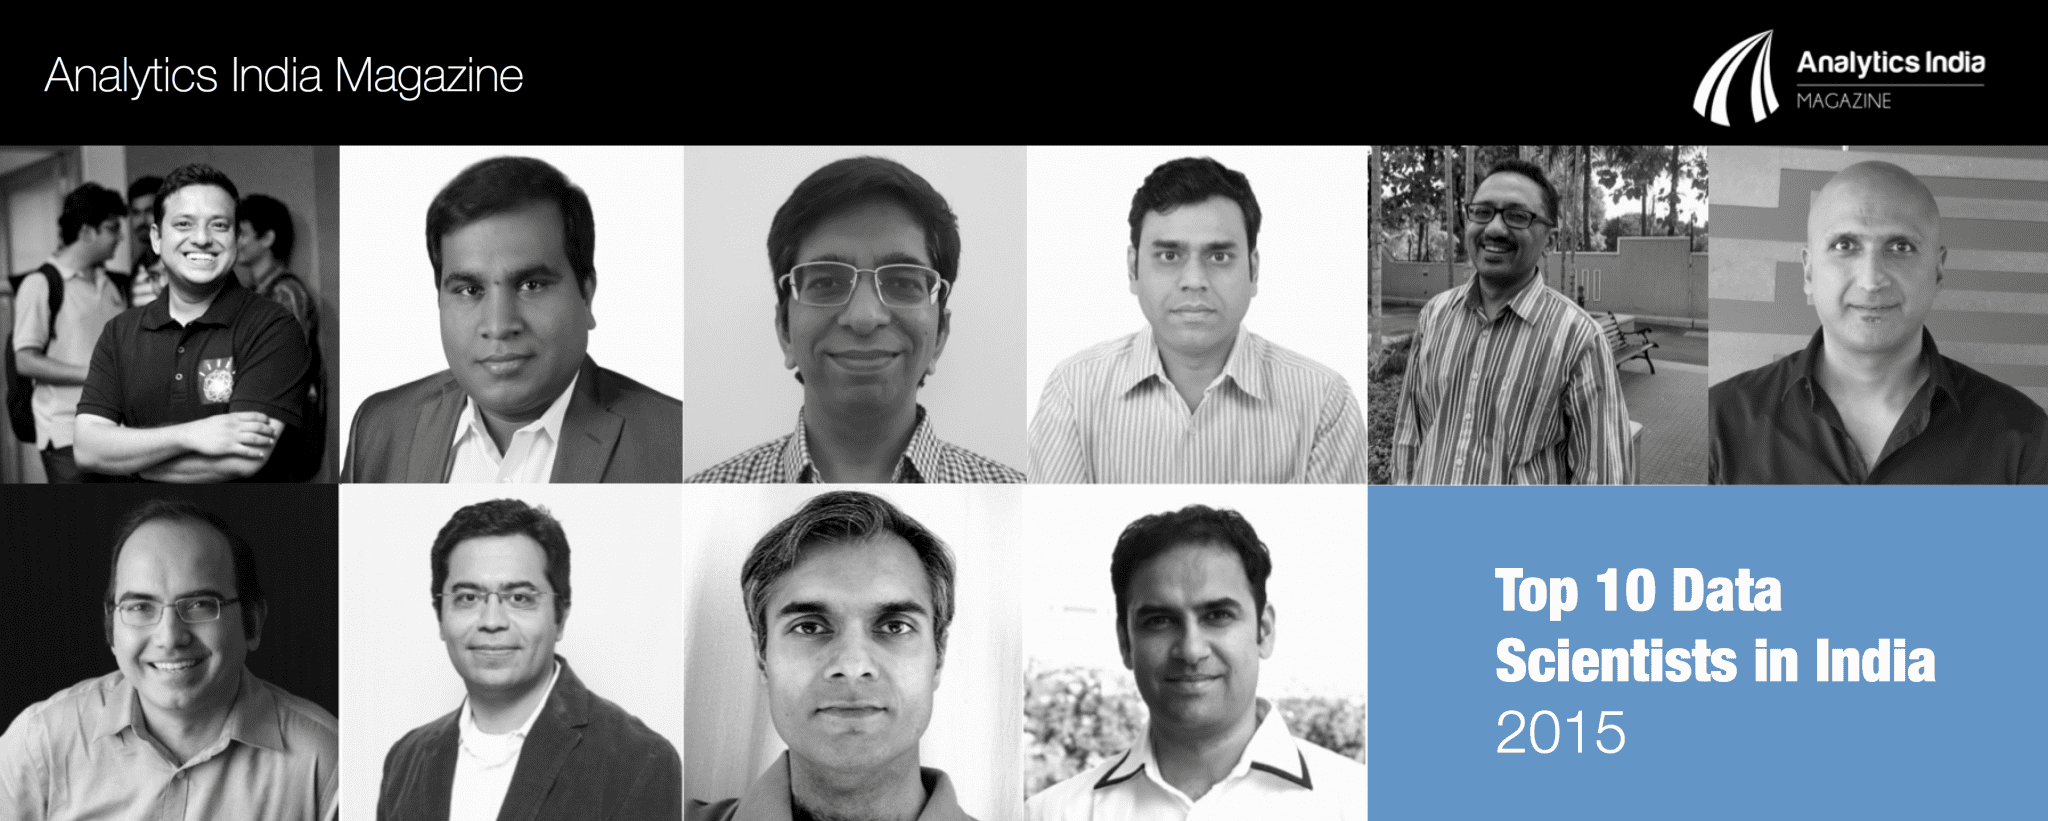 Top 10 Data Scientists in India